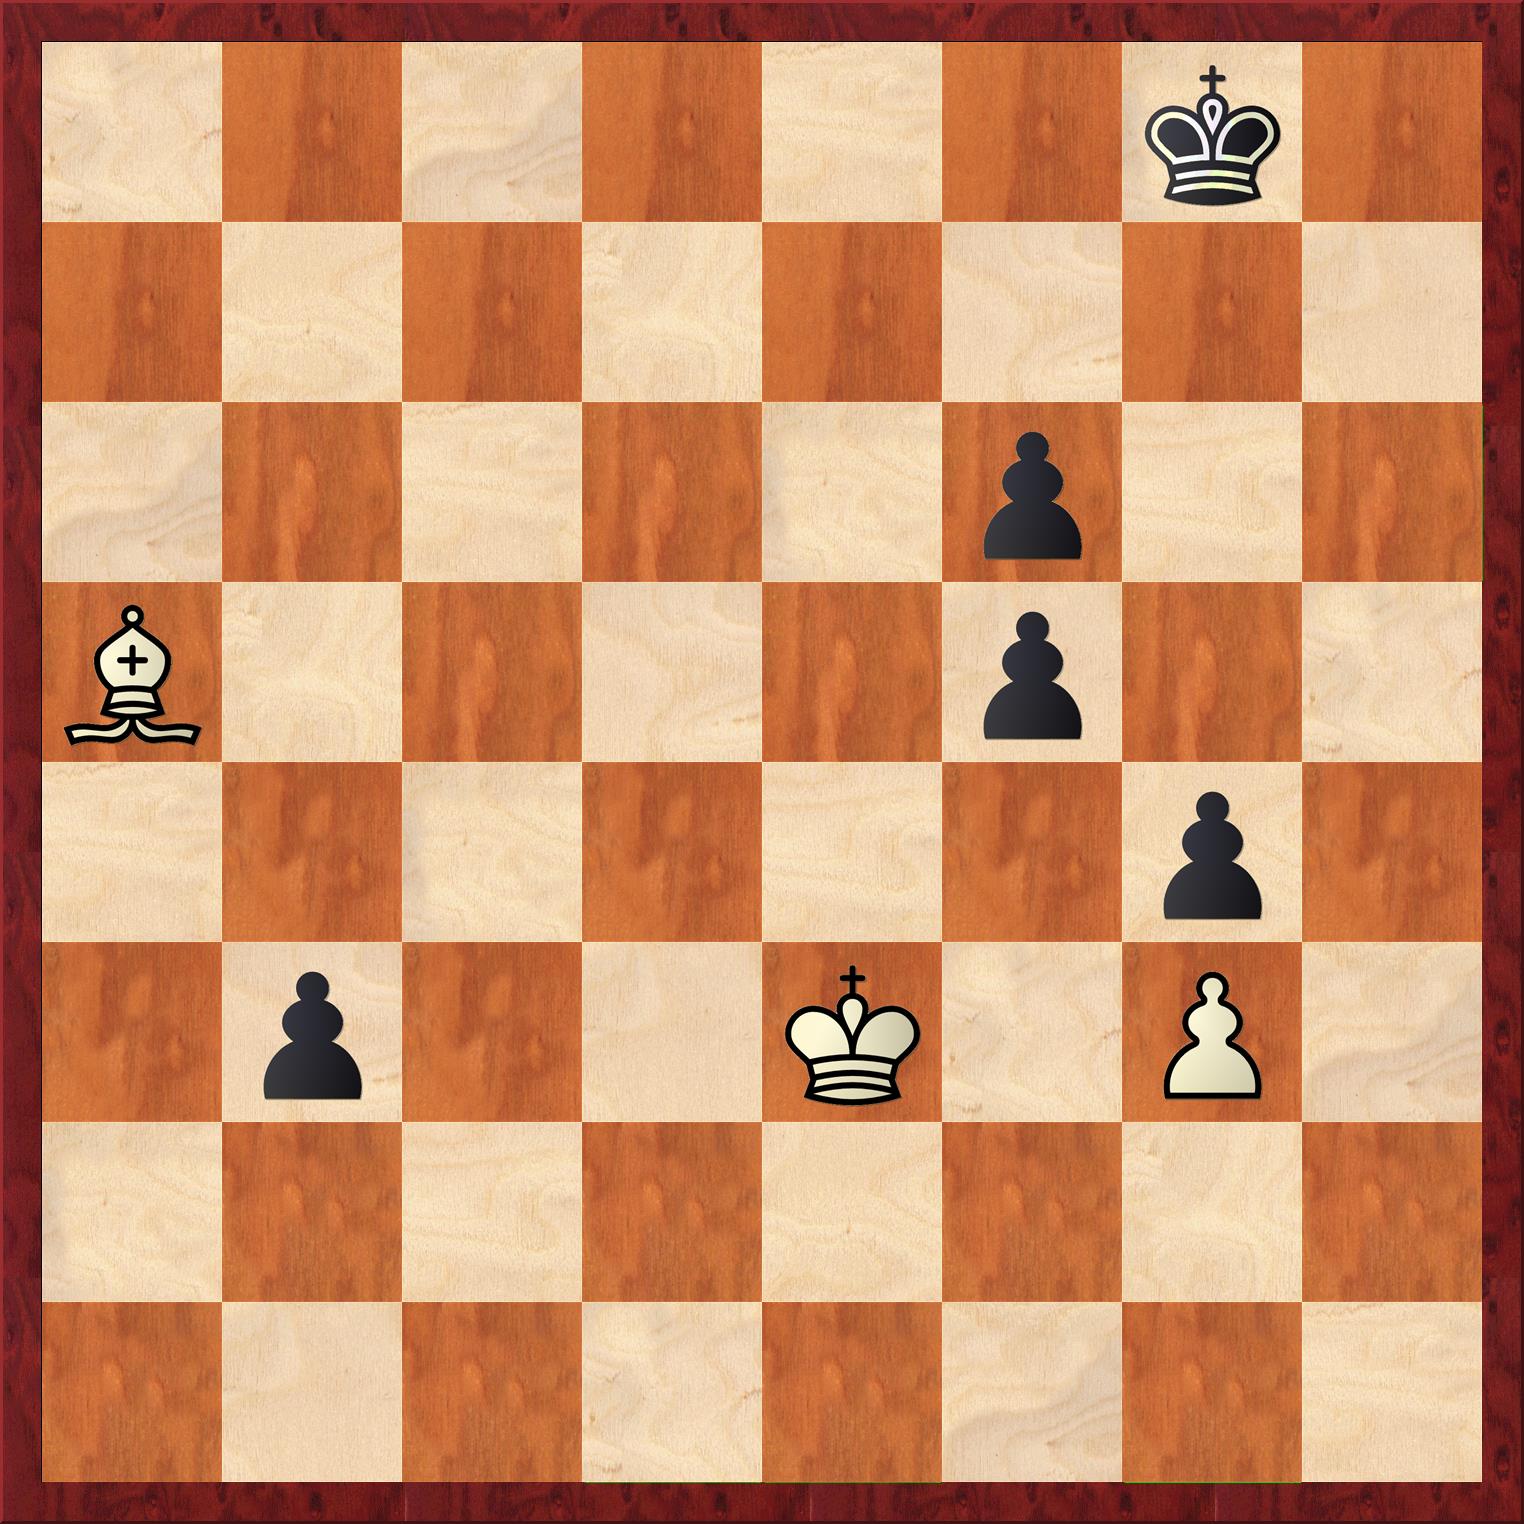 In Nybäck-Matthews, white apparentlyplayed 47.Kf4 which would lose immediately to 47…b2. After realizing that the move loses immediately, he grabs the piece and “adjusts” it, then moved the bishop.